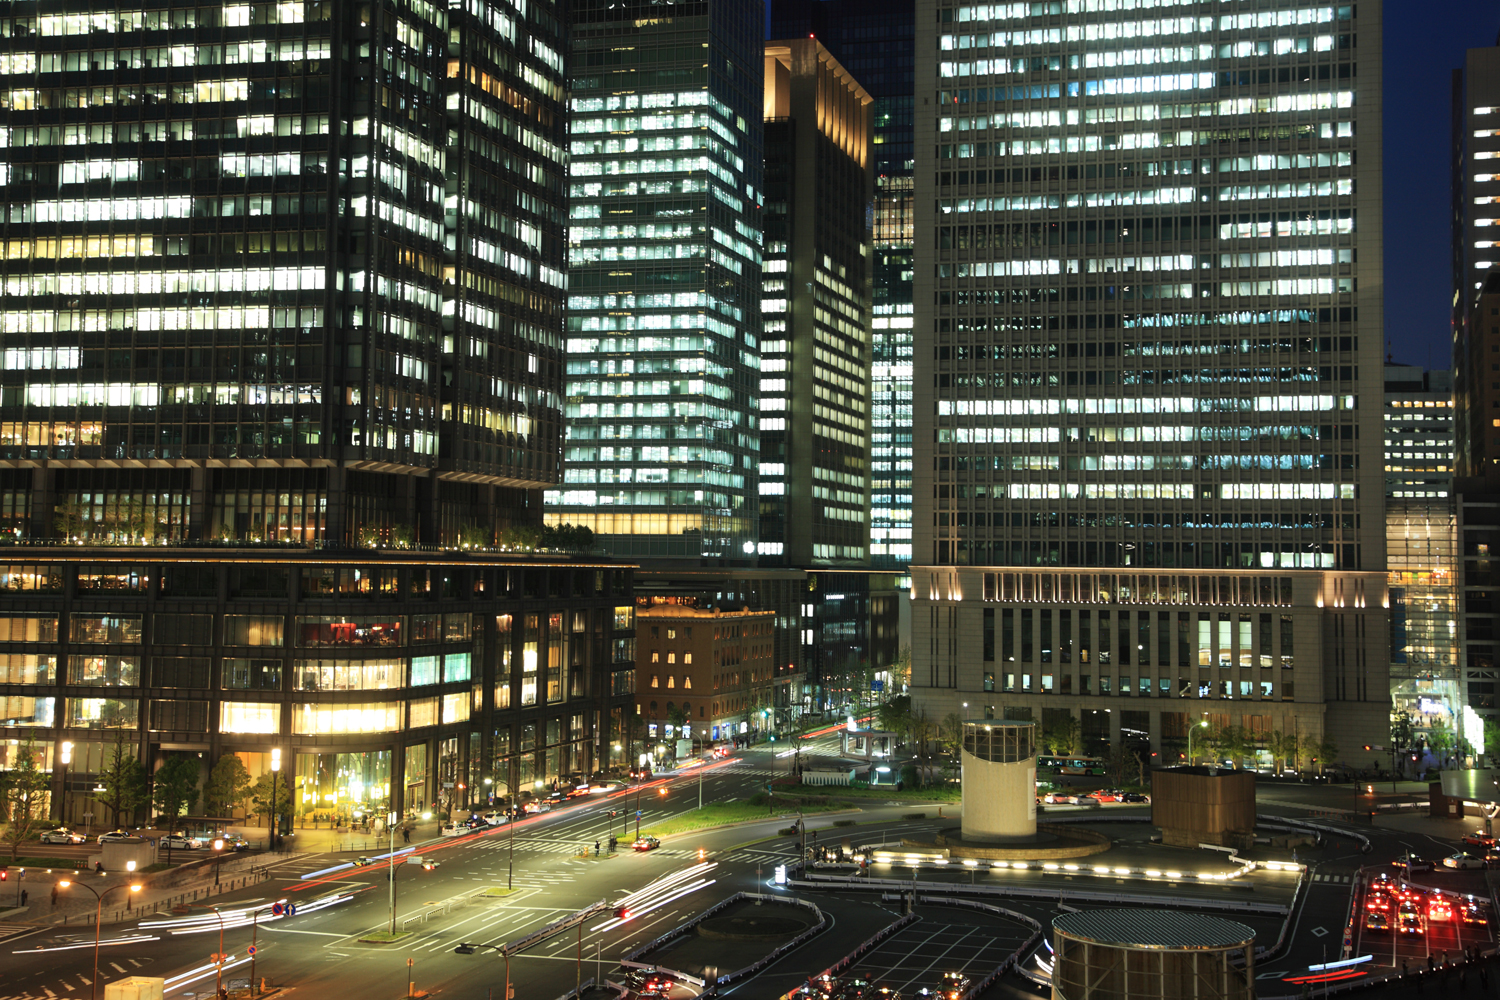 The Marunouchi district of Tokyo, Japan. (Getty Images)